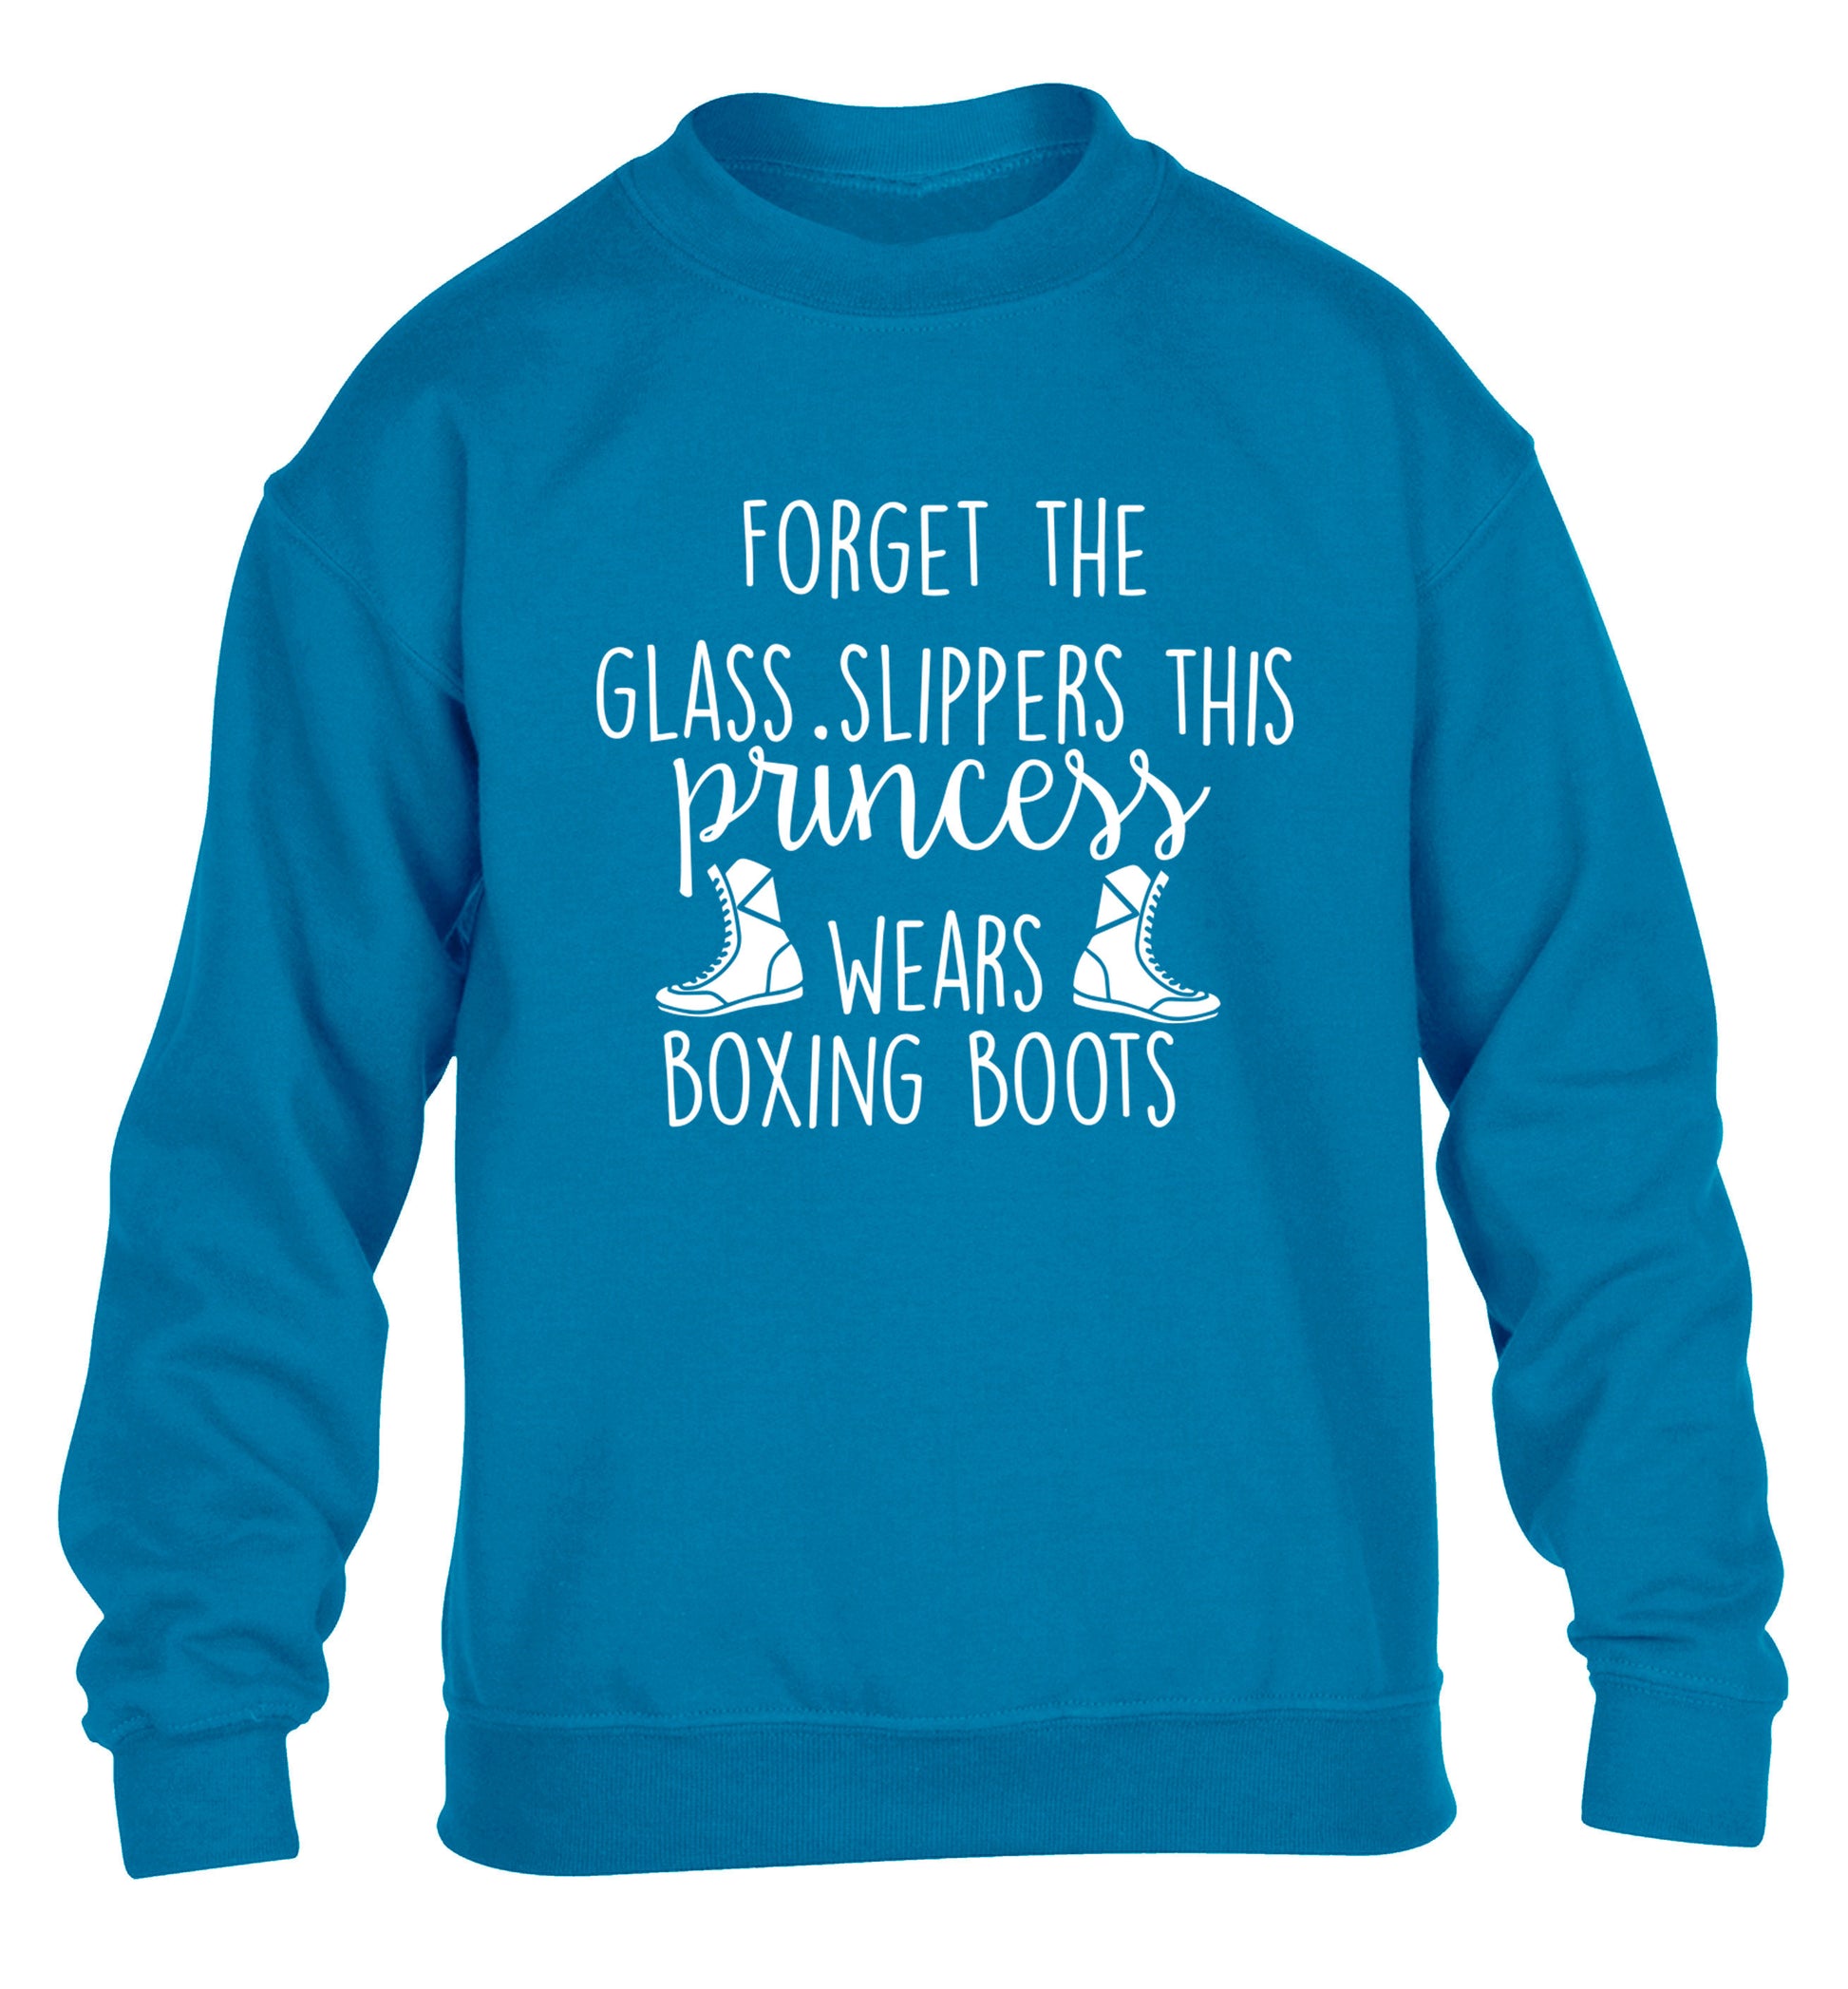 Forget the glass slippers this princess wears boxing boots children's blue sweater 12-14 Years